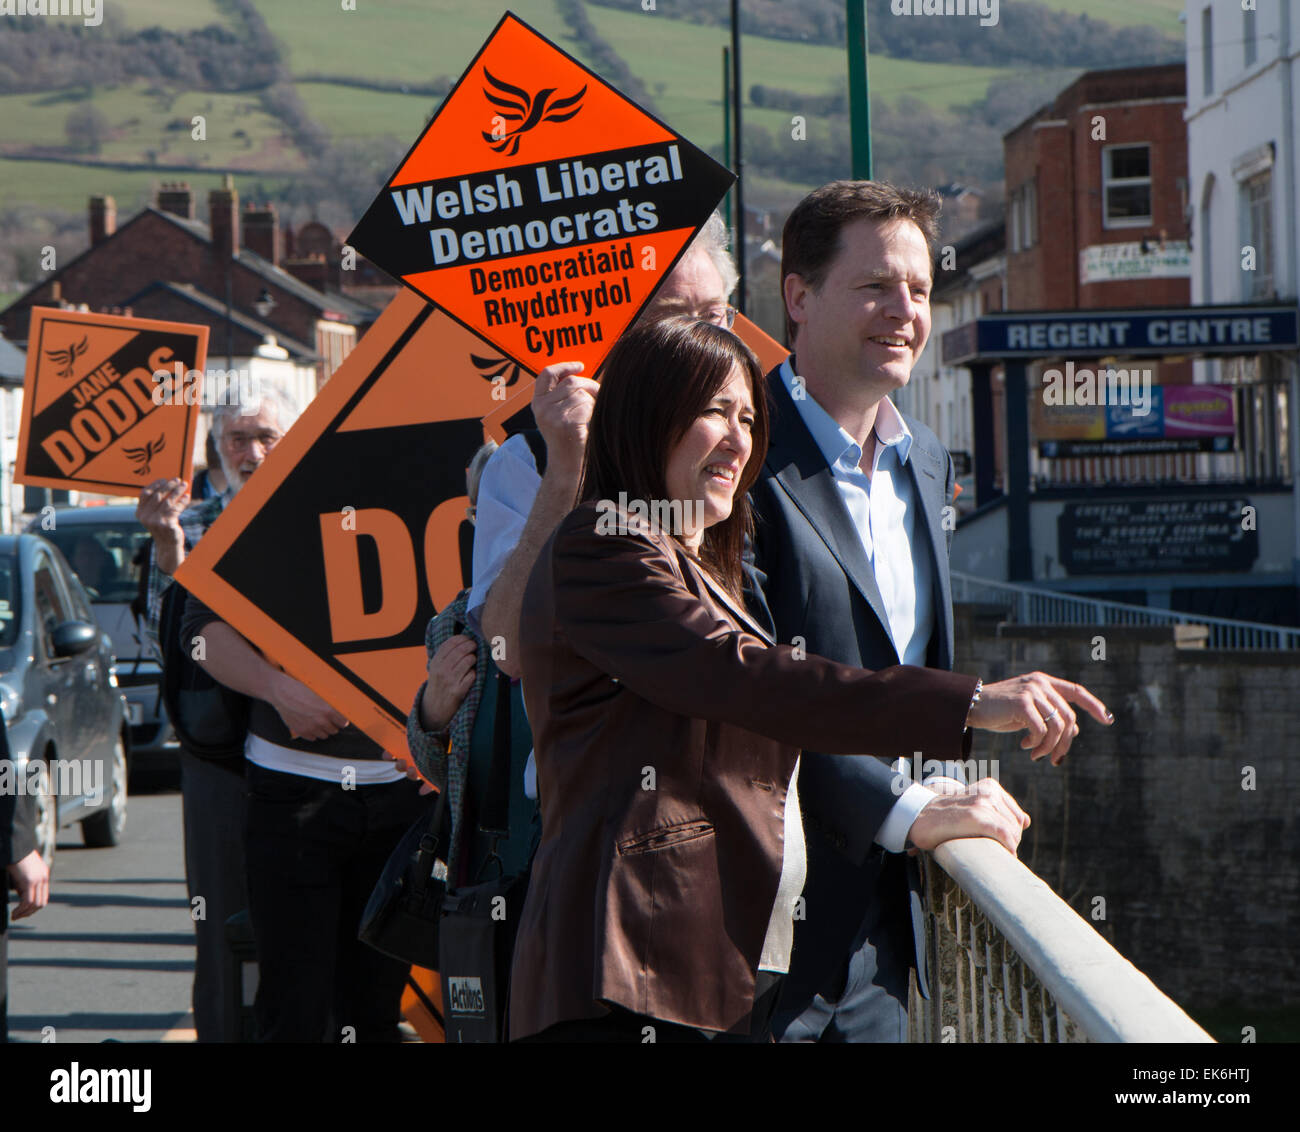 Newtown, UK. 7th April, 2015. Deputy Prime Minister & Leader of the Lib Dems, Nick Clegg, visits Newtown in the Montgomeryshire Constituency as a part of his campaign for votes in the forthcoming General Election, UK. © Jon Freeman/Alamy Live News Stock Photo